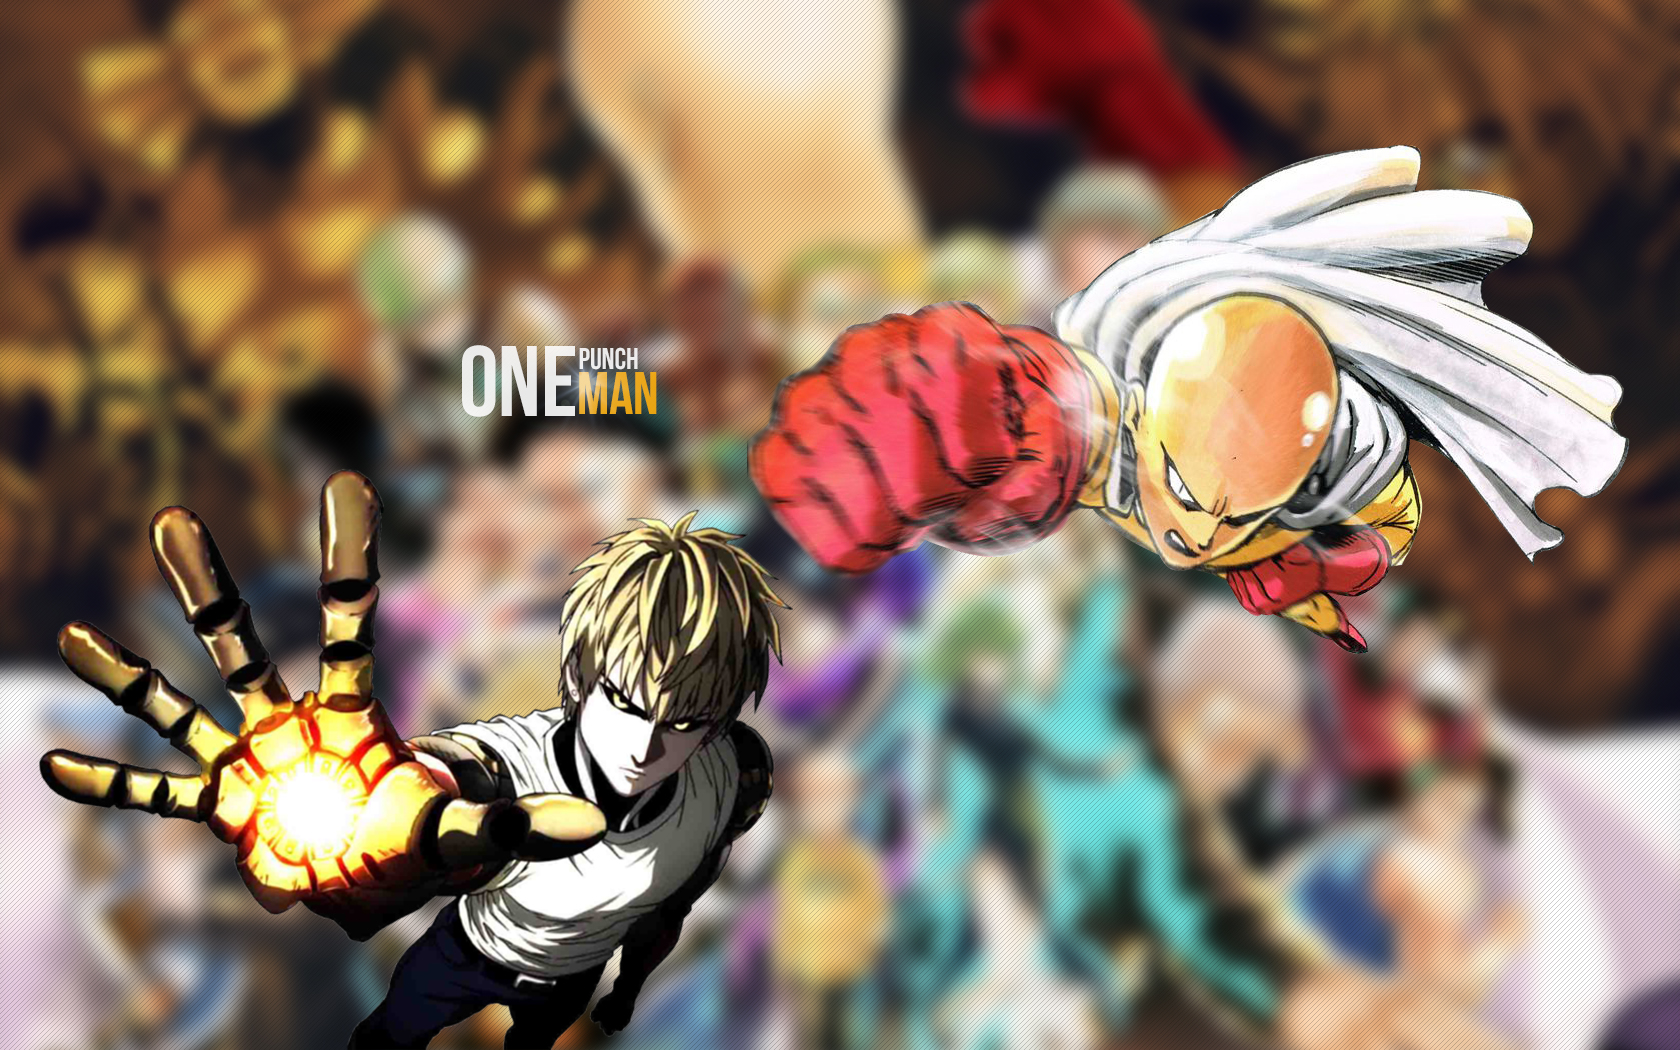 One Punch Man Wallpaper Genos Saitama by dommy. Daily Anime Art